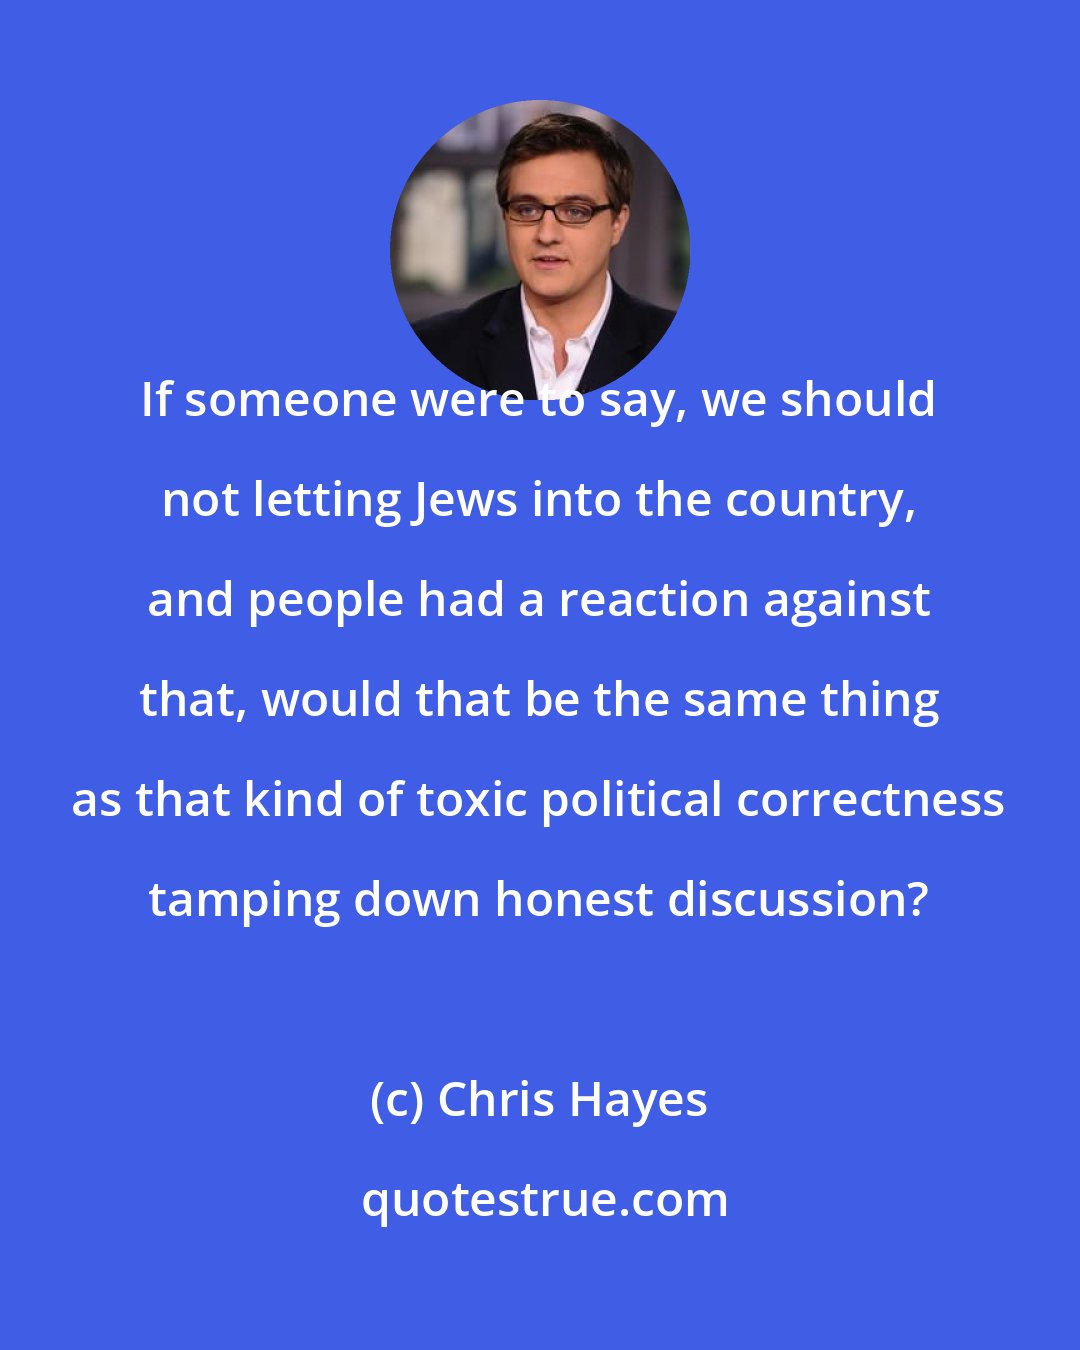 Chris Hayes: If someone were to say, we should not letting Jews into the country, and people had a reaction against that, would that be the same thing as that kind of toxic political correctness tamping down honest discussion?